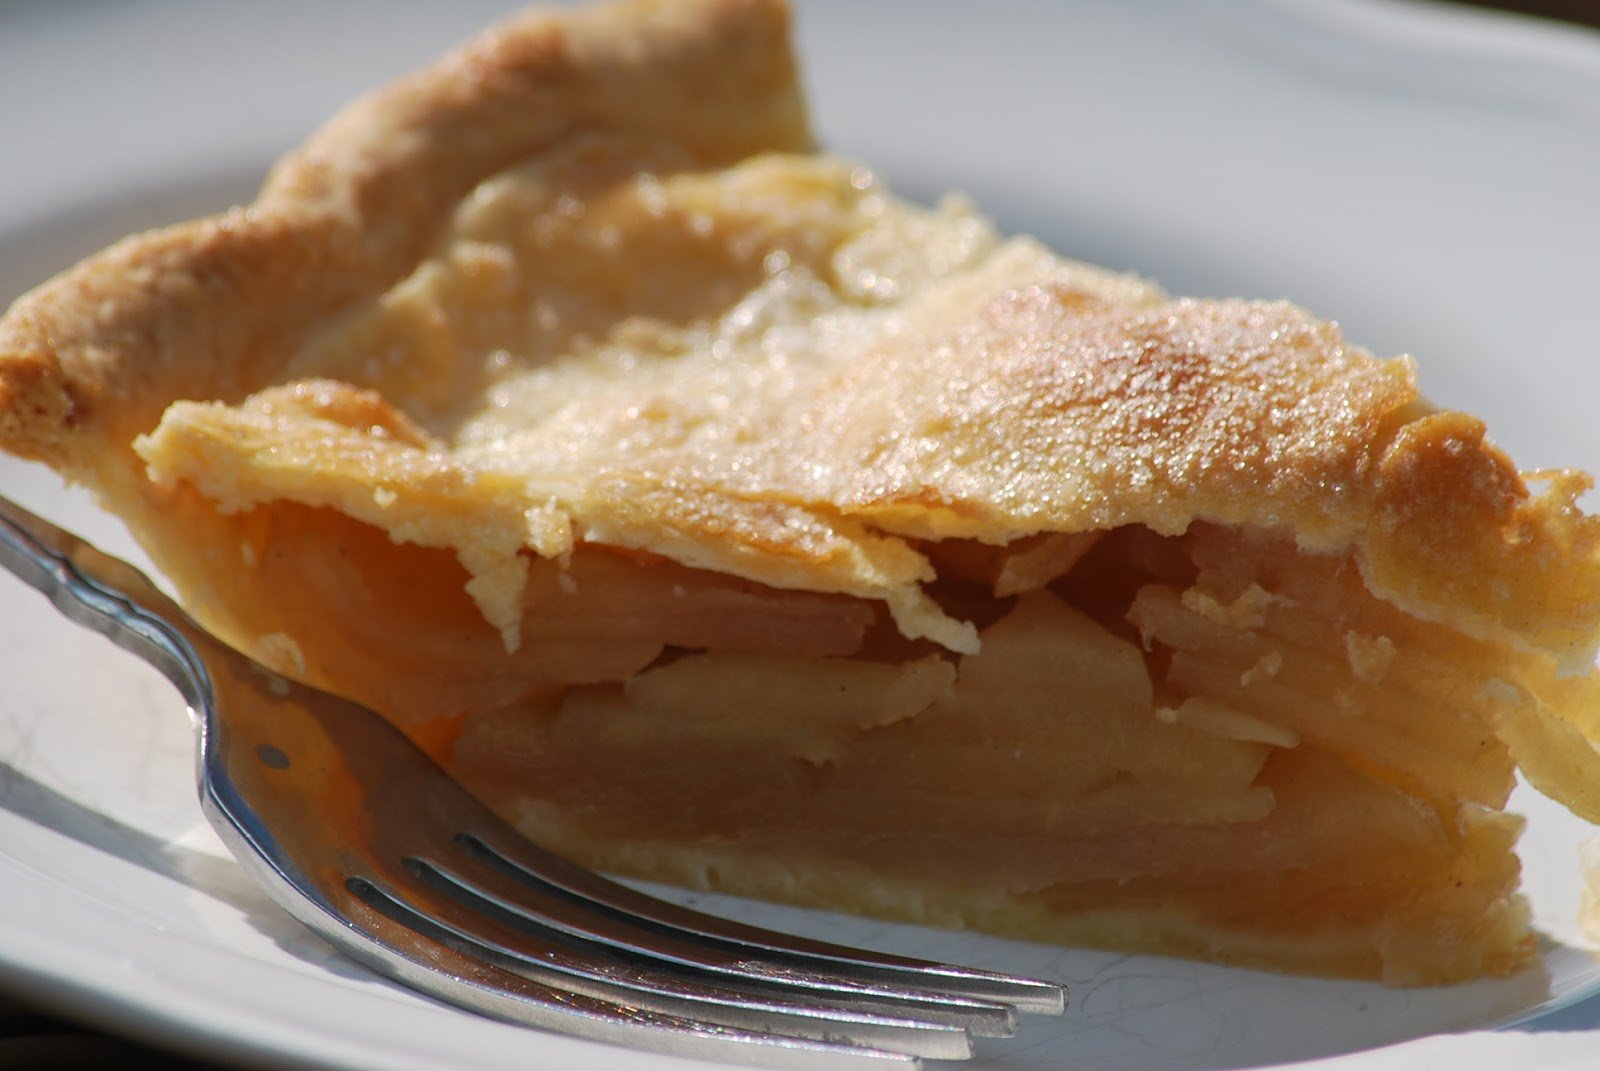 My story in recipes: Homemade Apple Pie